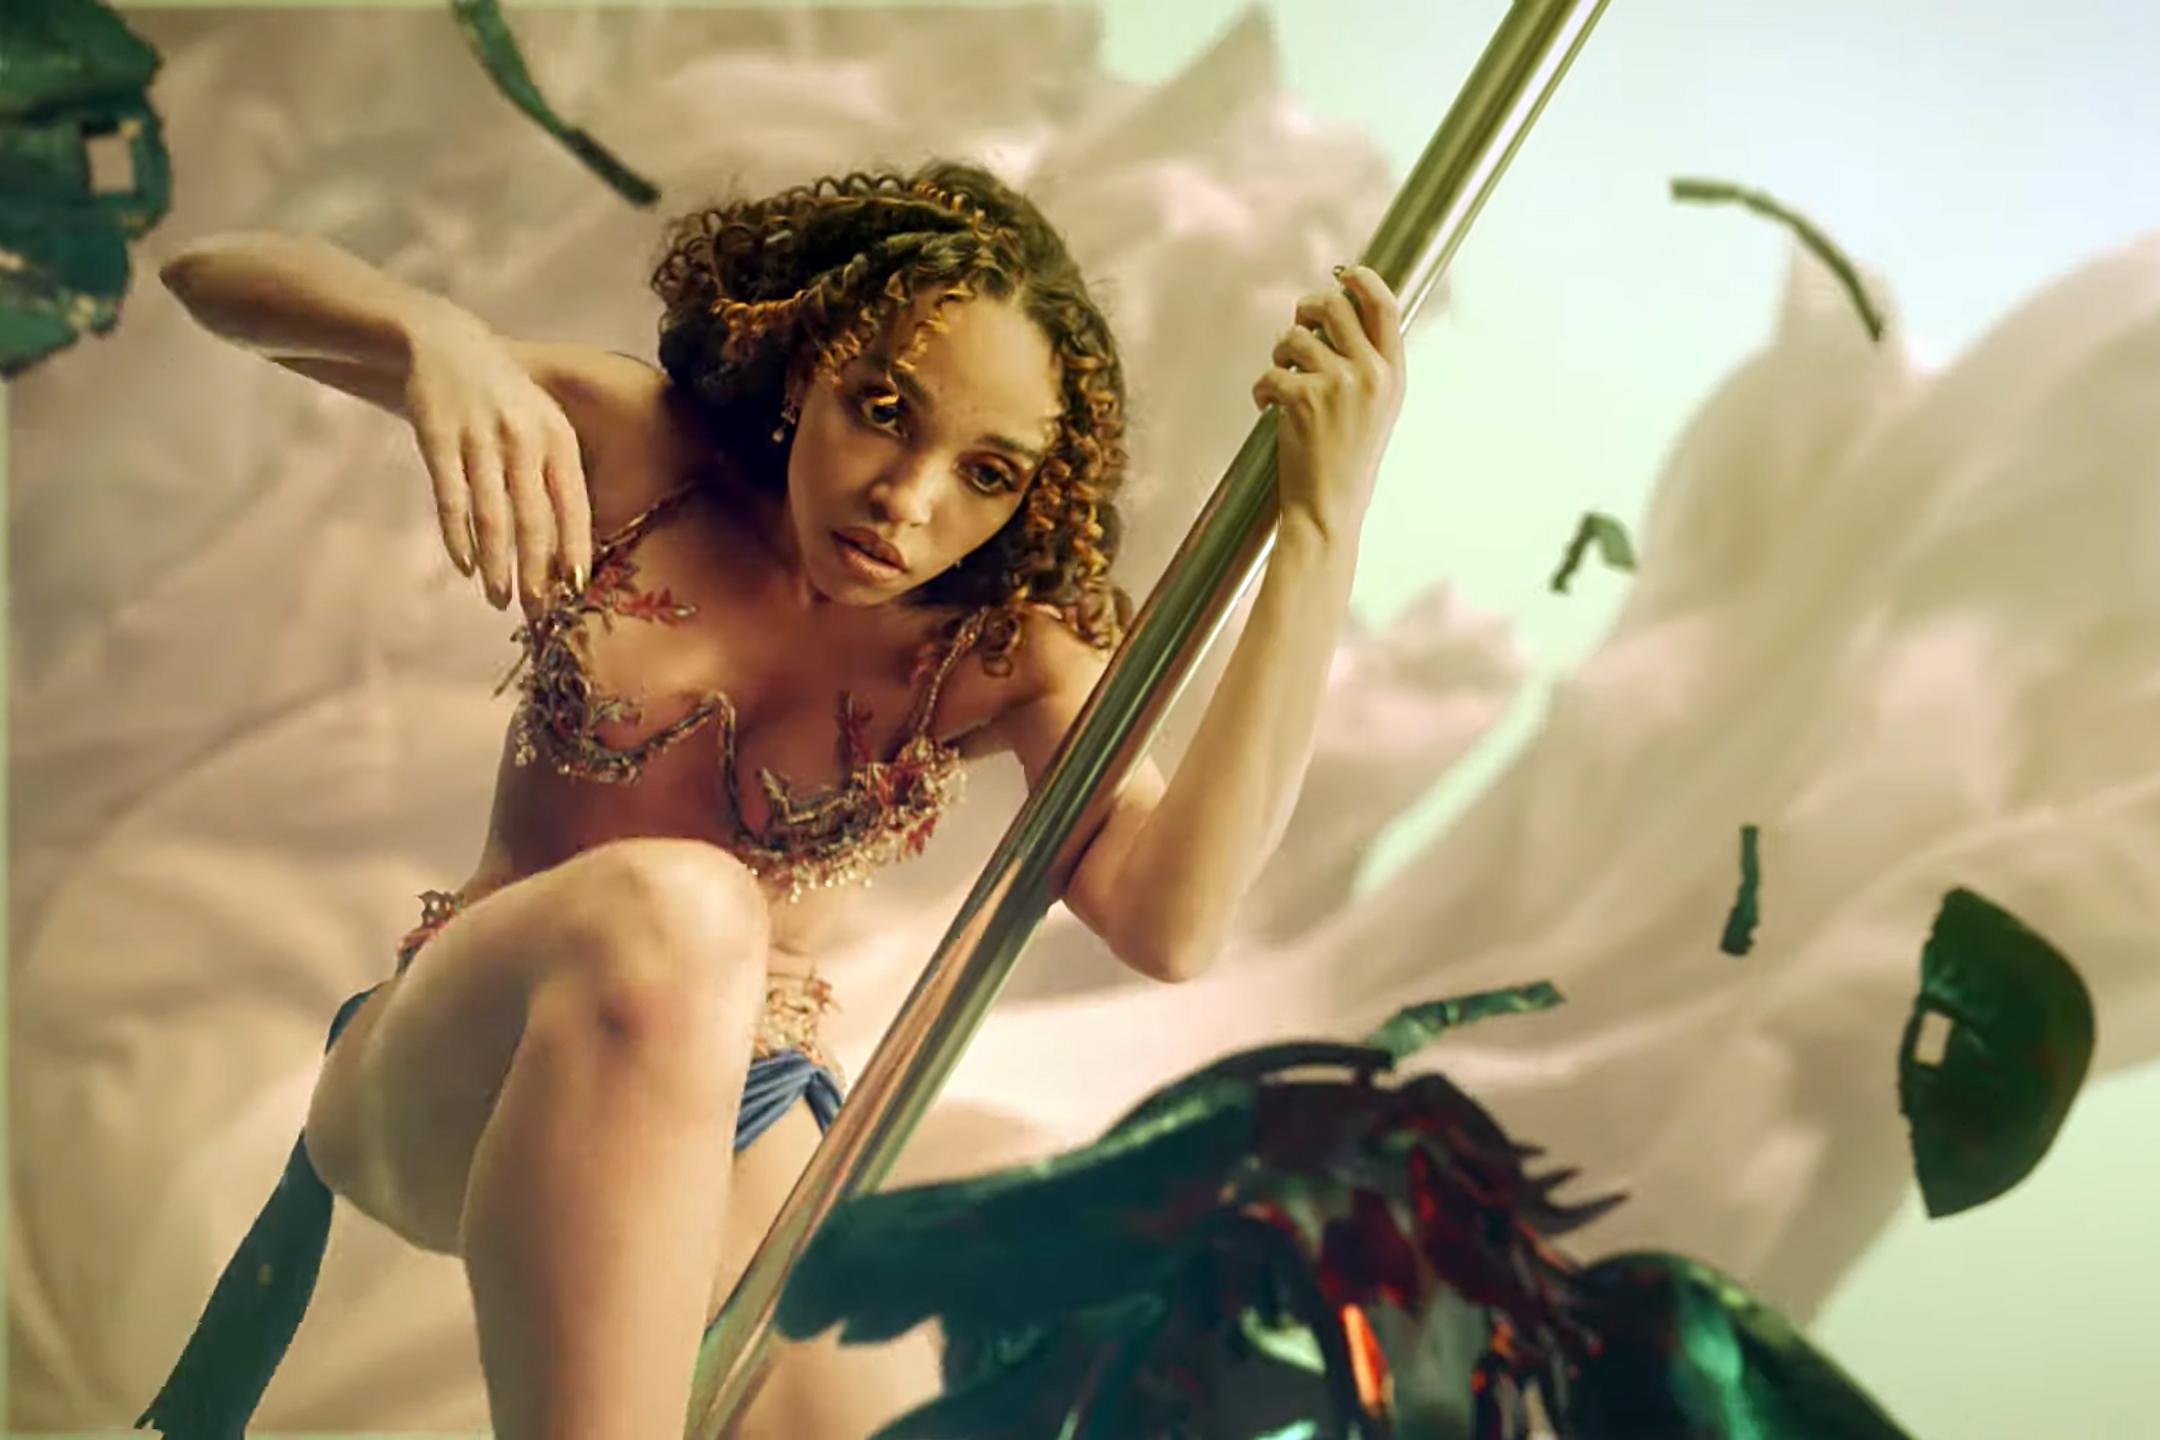 Watch FKA Twigs' Trippy, Emotional New Video for 'Cellophane